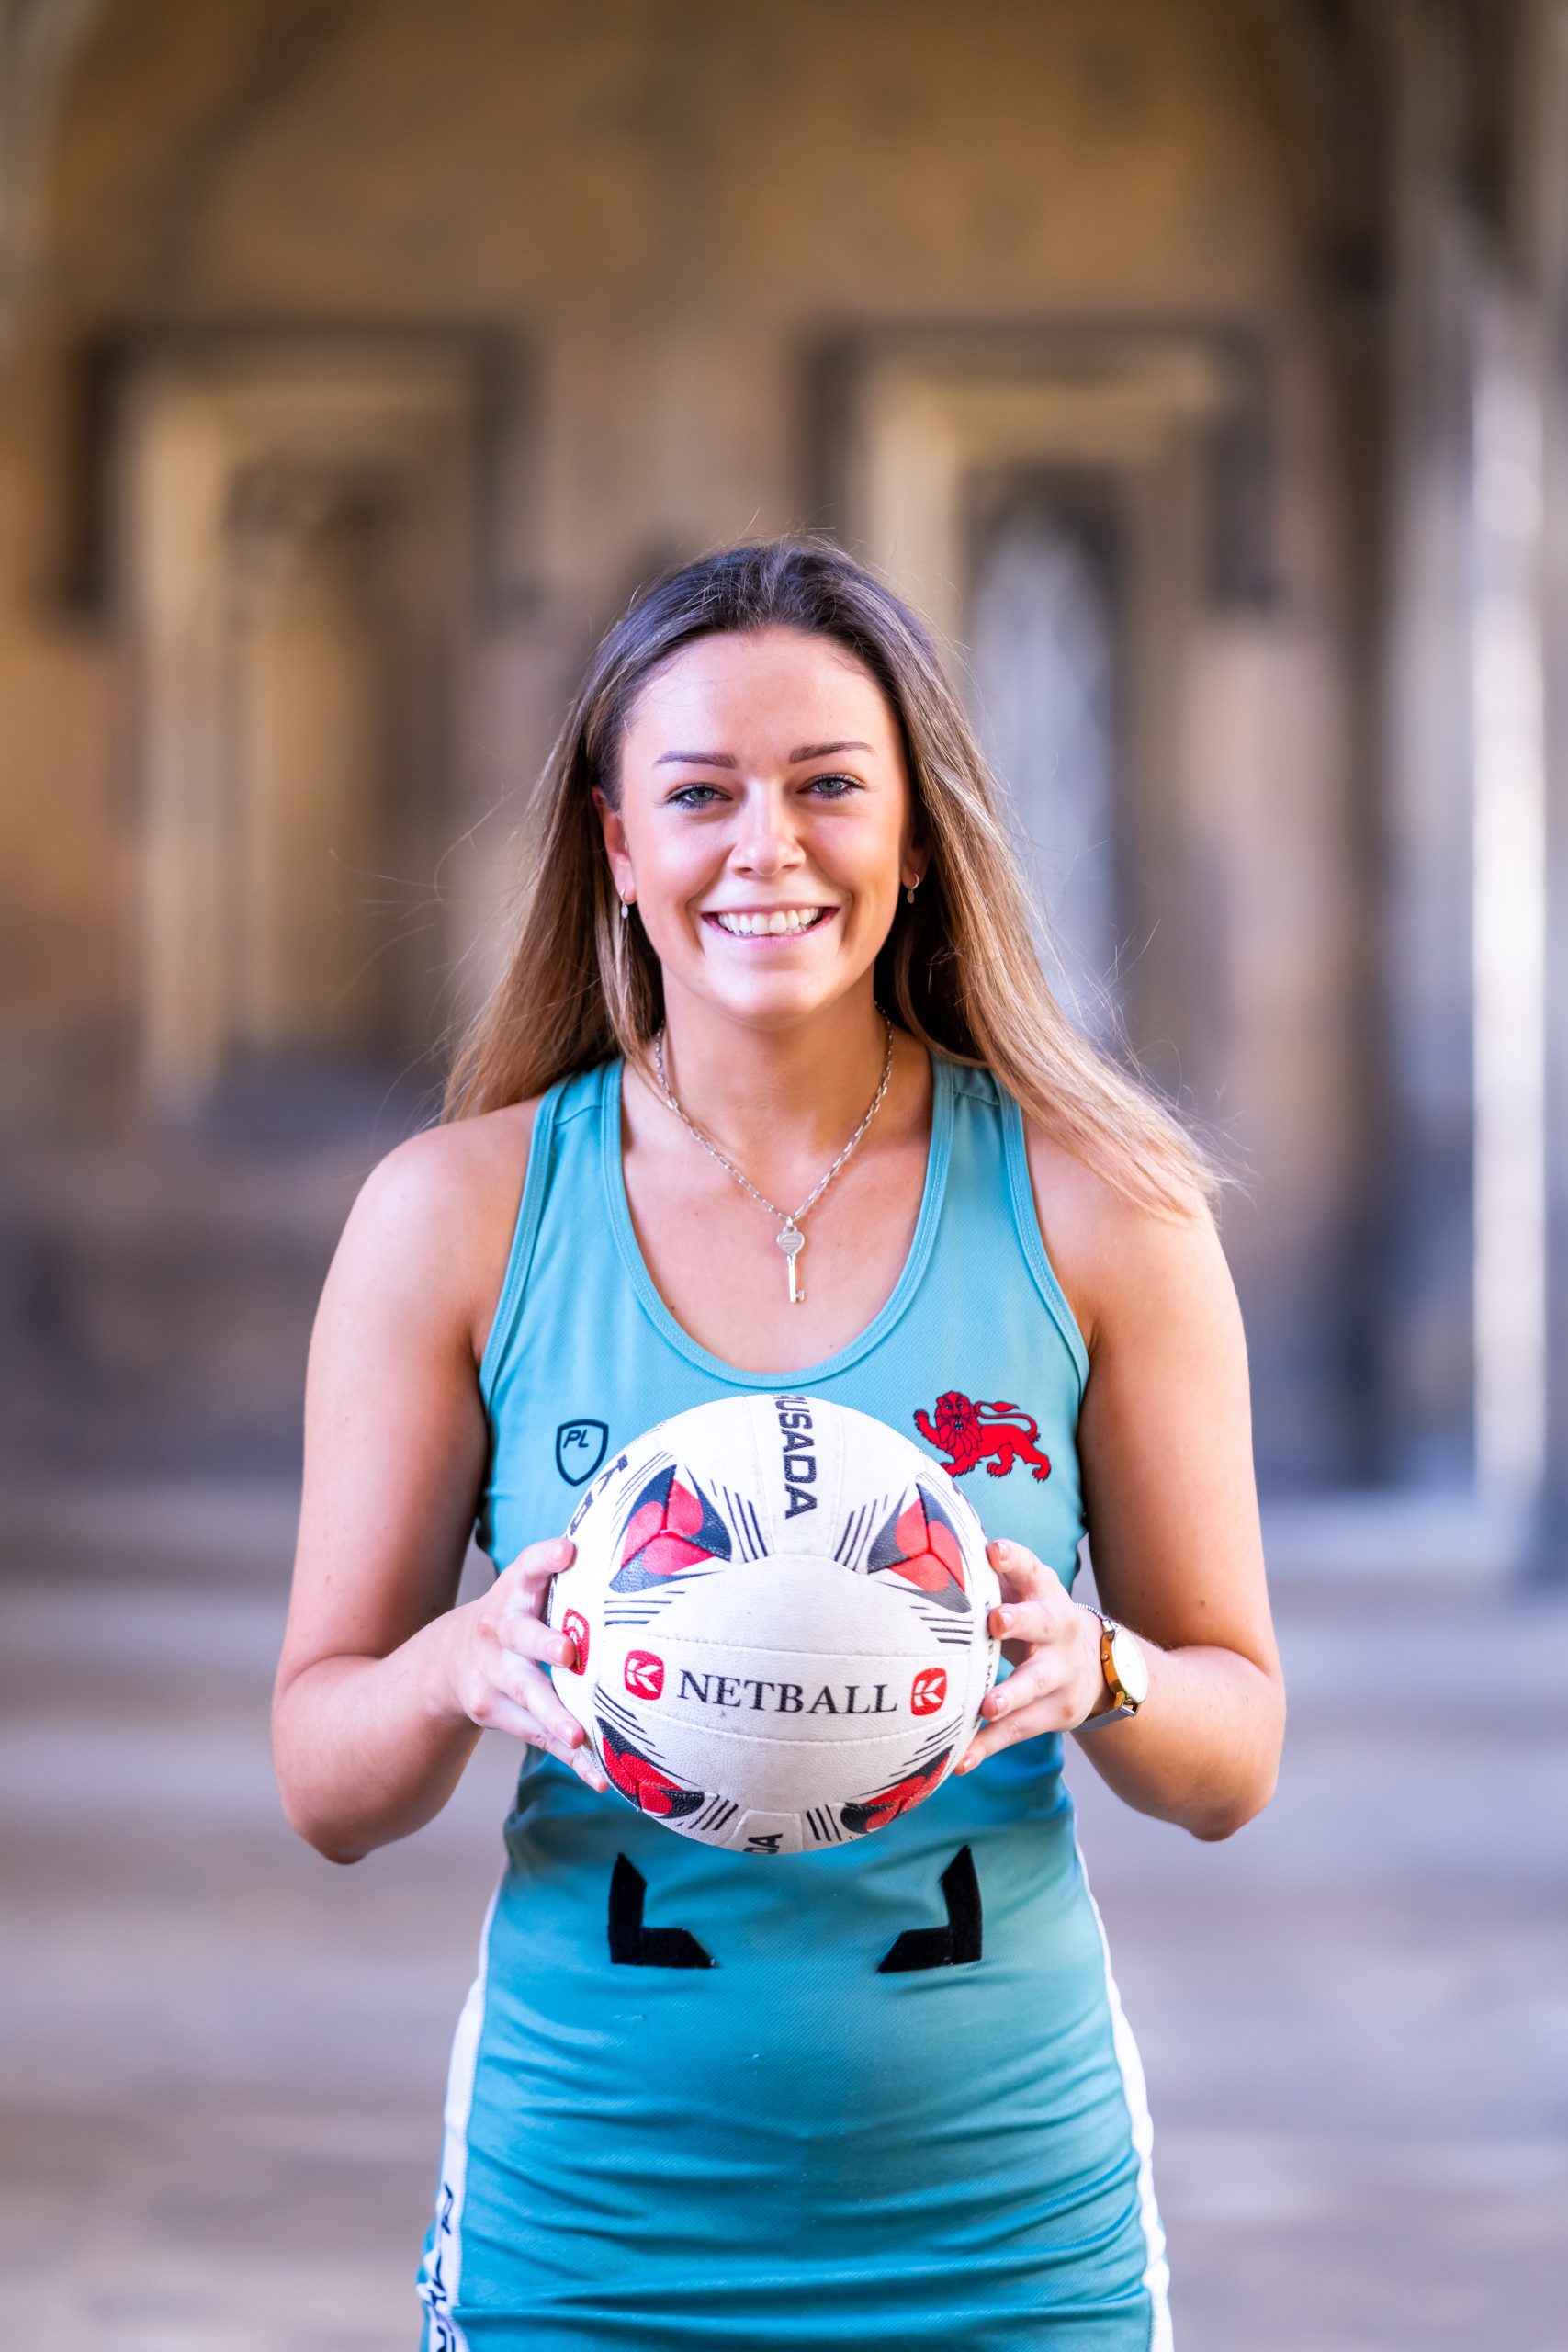 The CULNC captain stands smiling in her netball dress, holding a netball in front of her